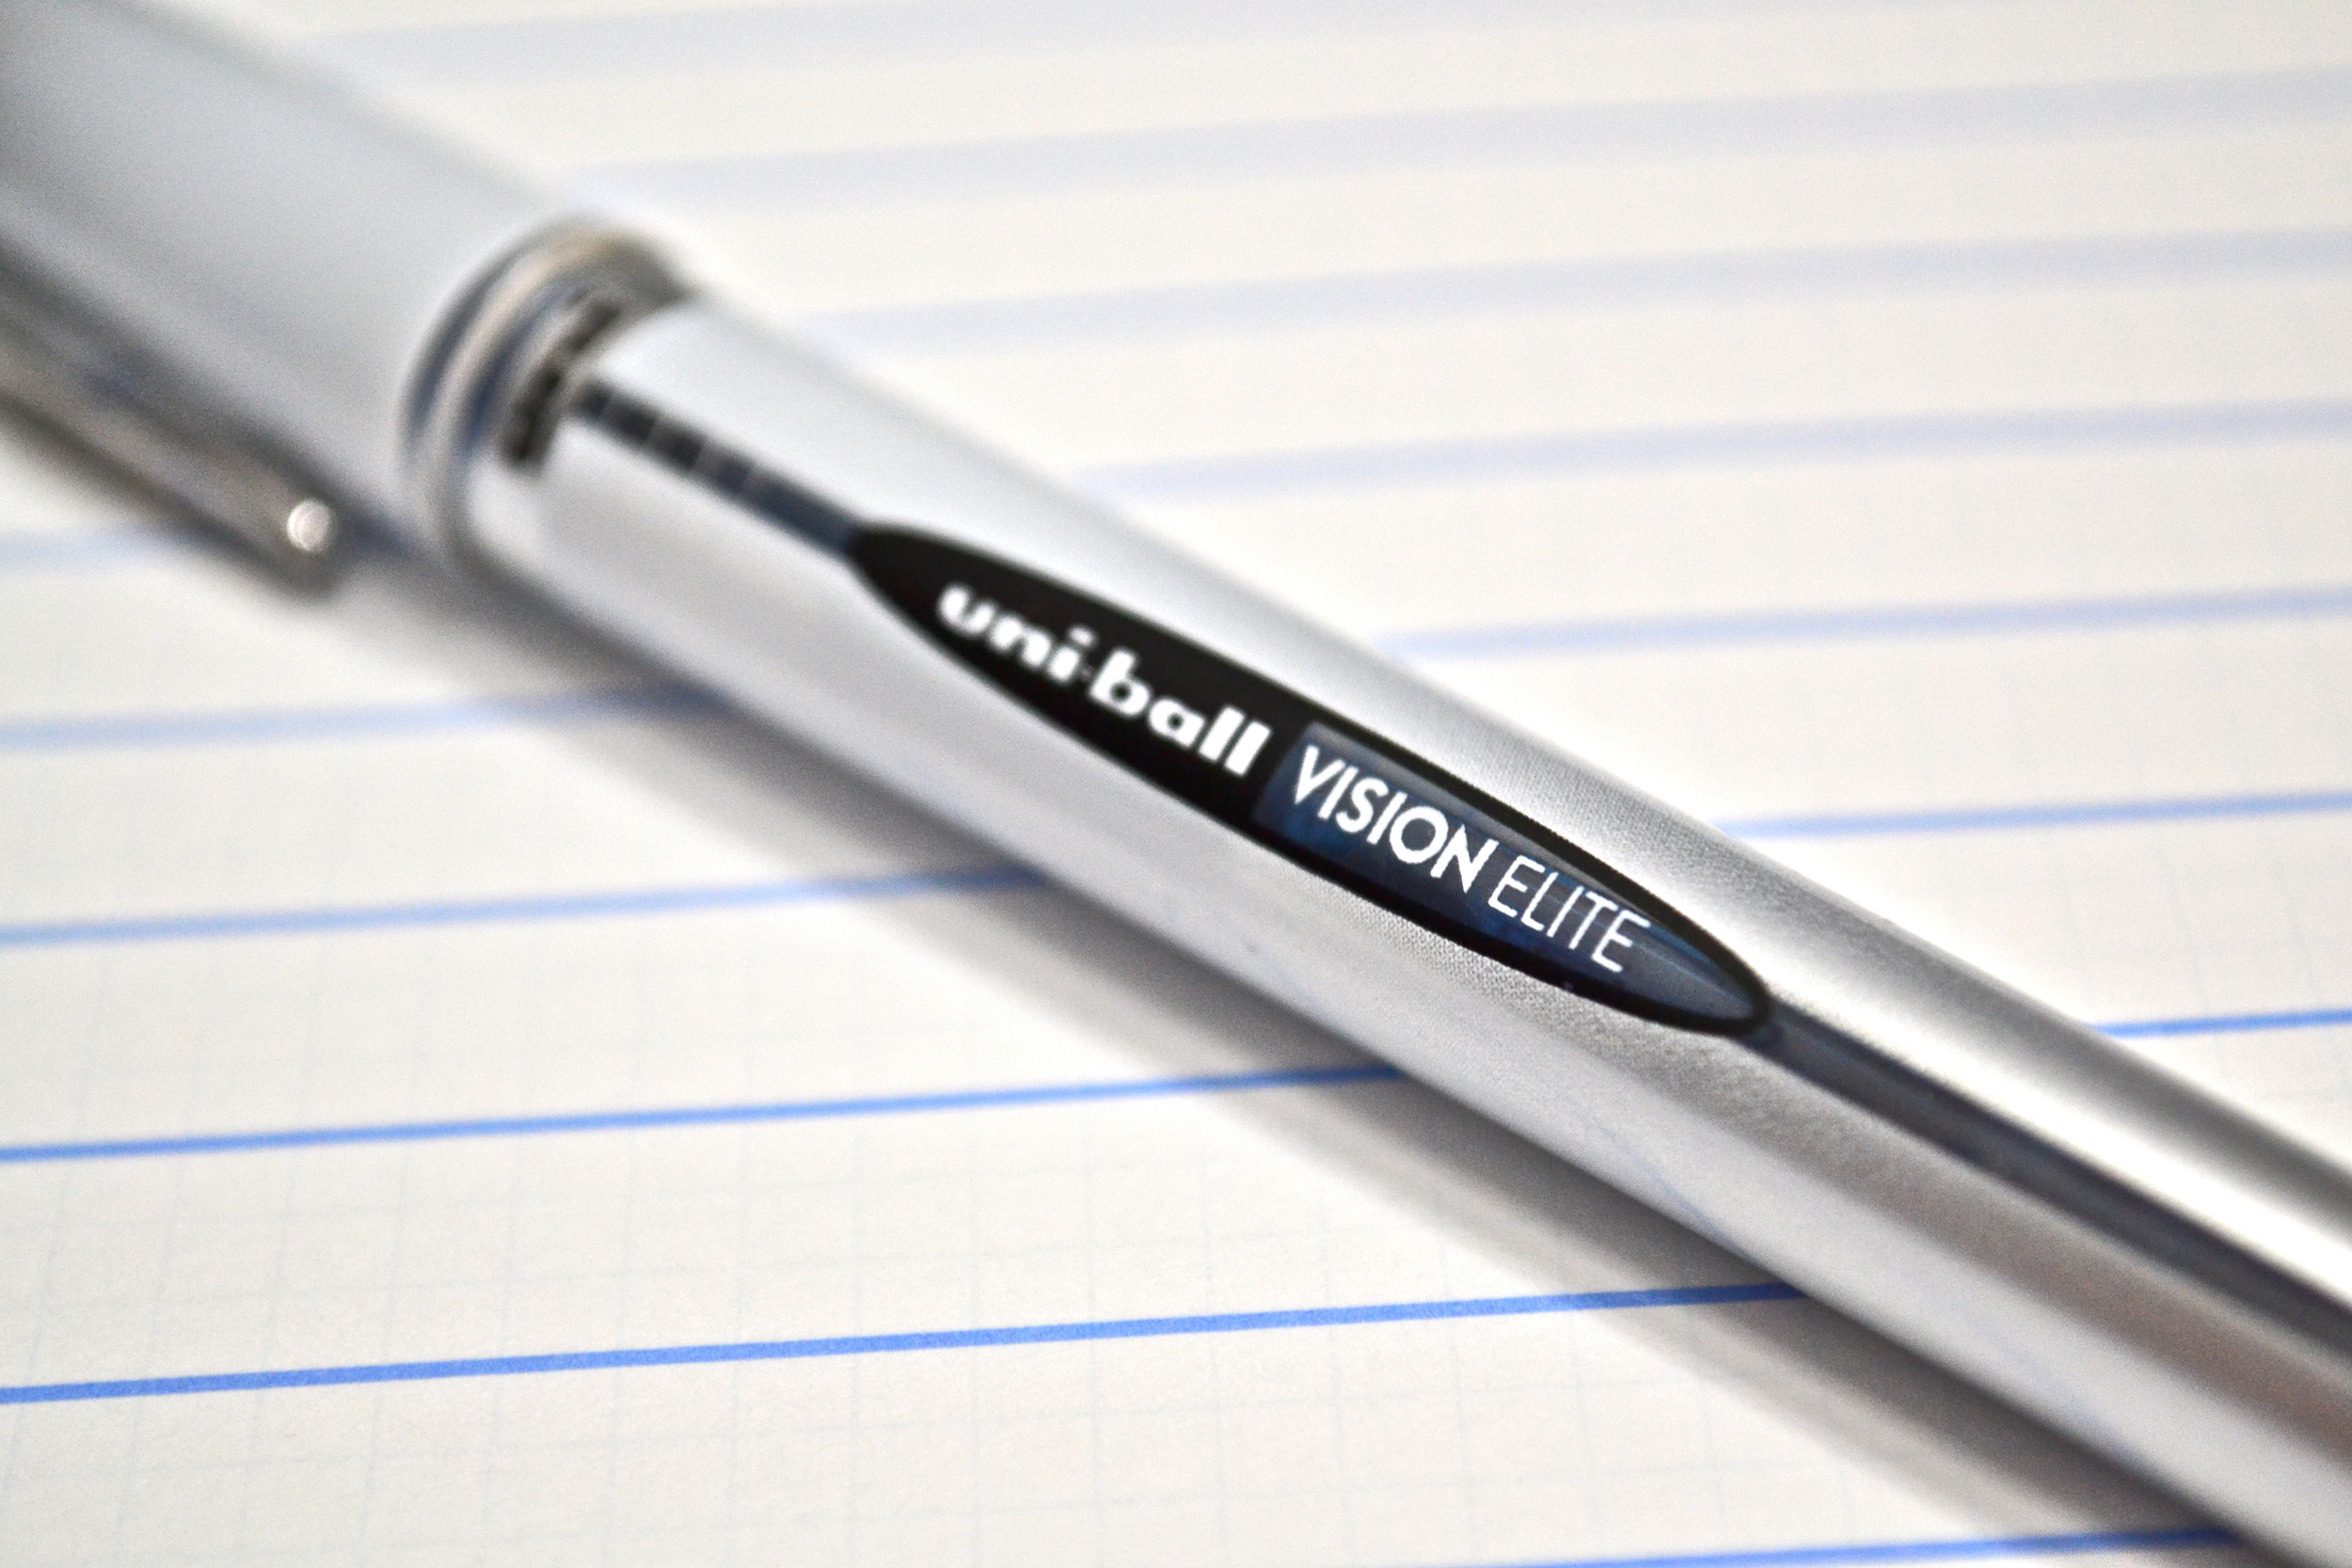 The Best Pen for Writing Is the Uni-Ball Vision